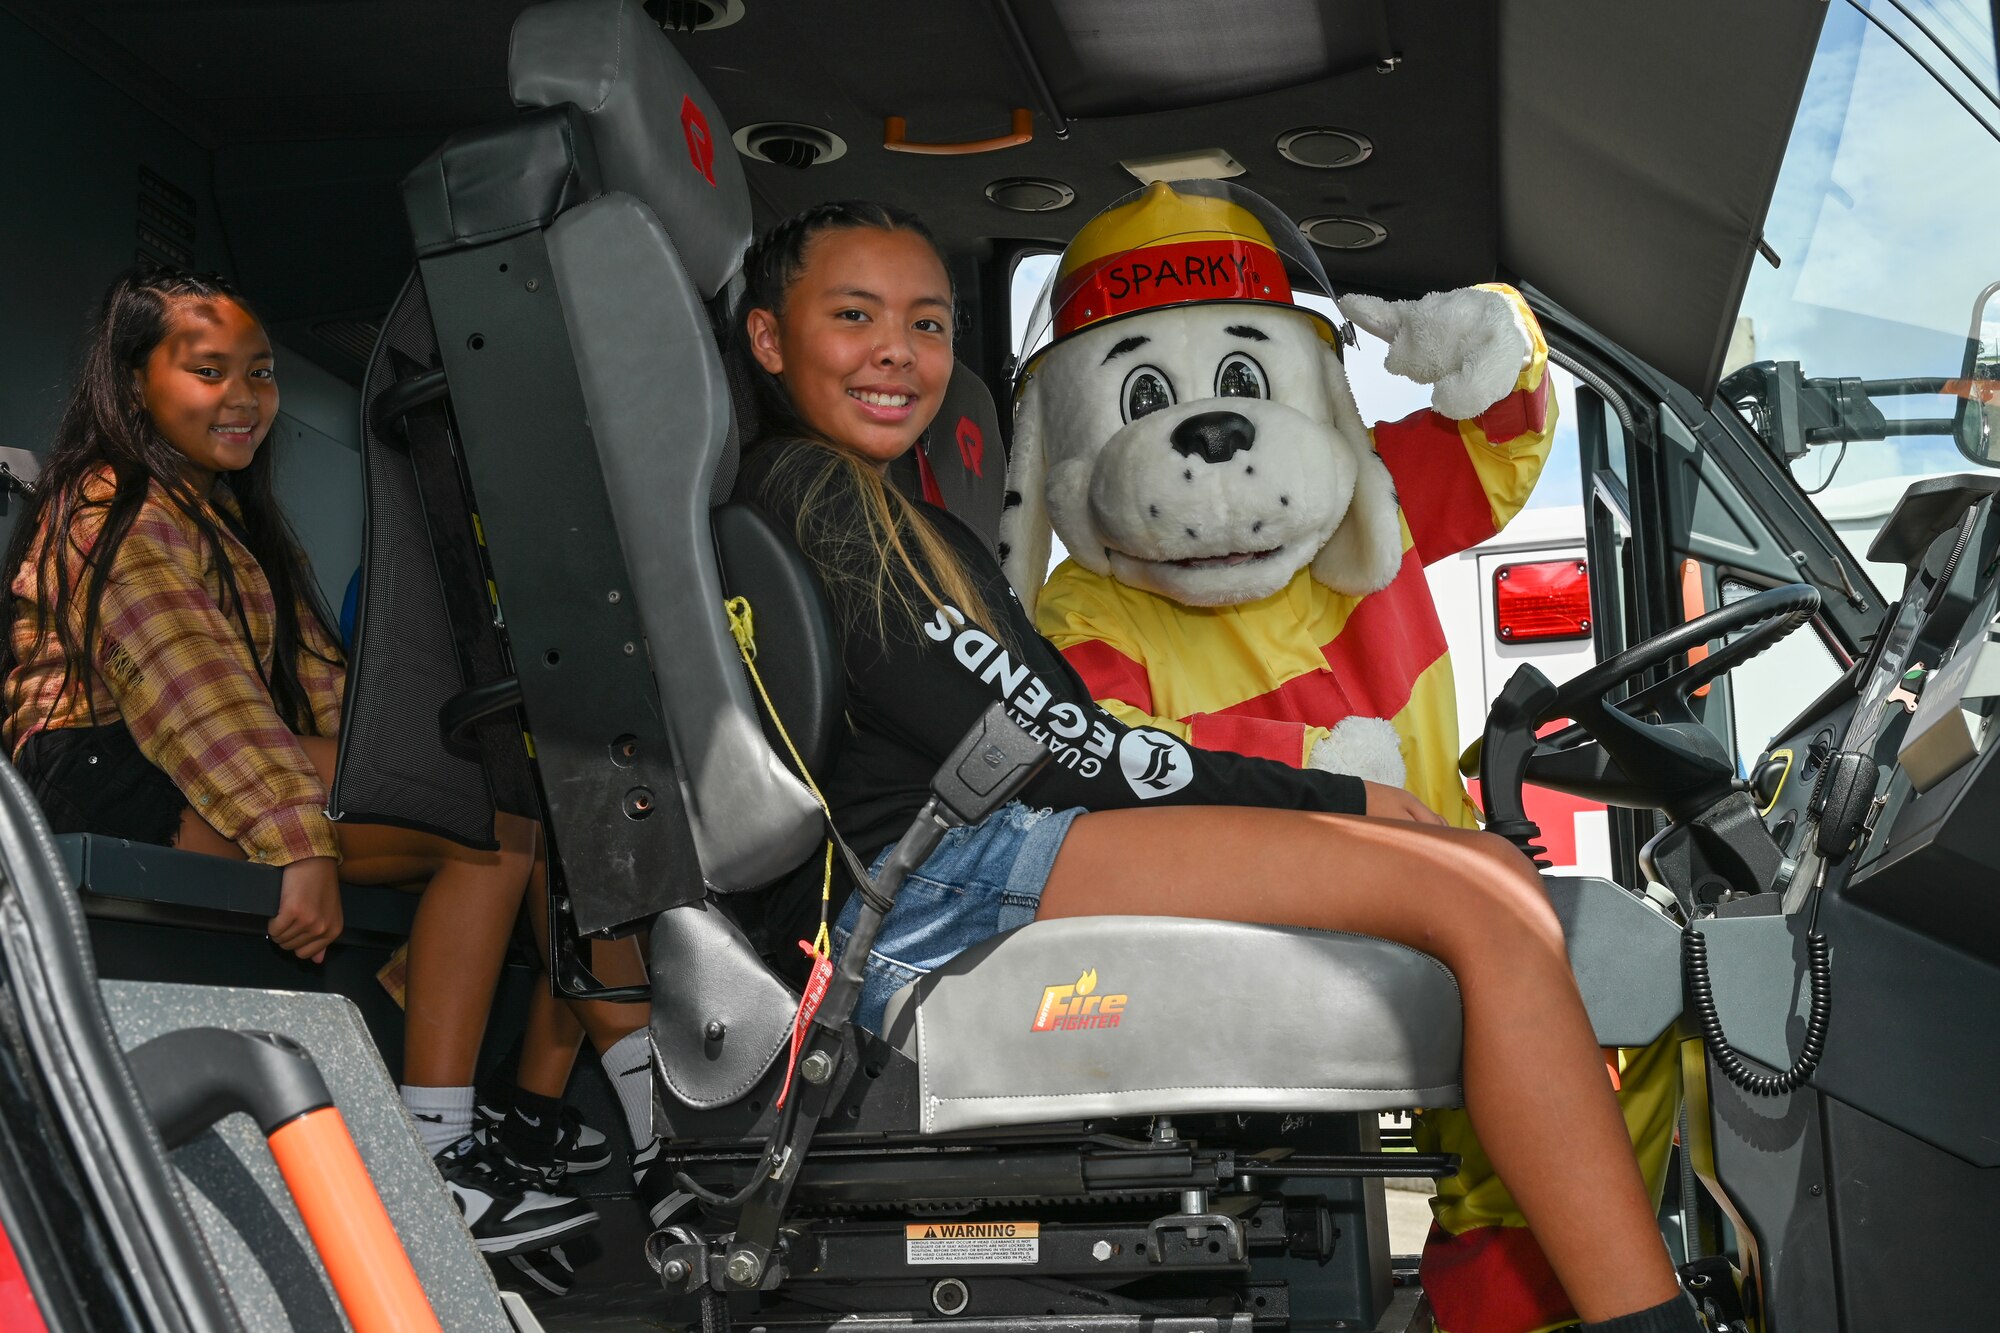 Sparky the Fire Dog poses for a photo with children of a military family inside of an airport rescue firefighting truck